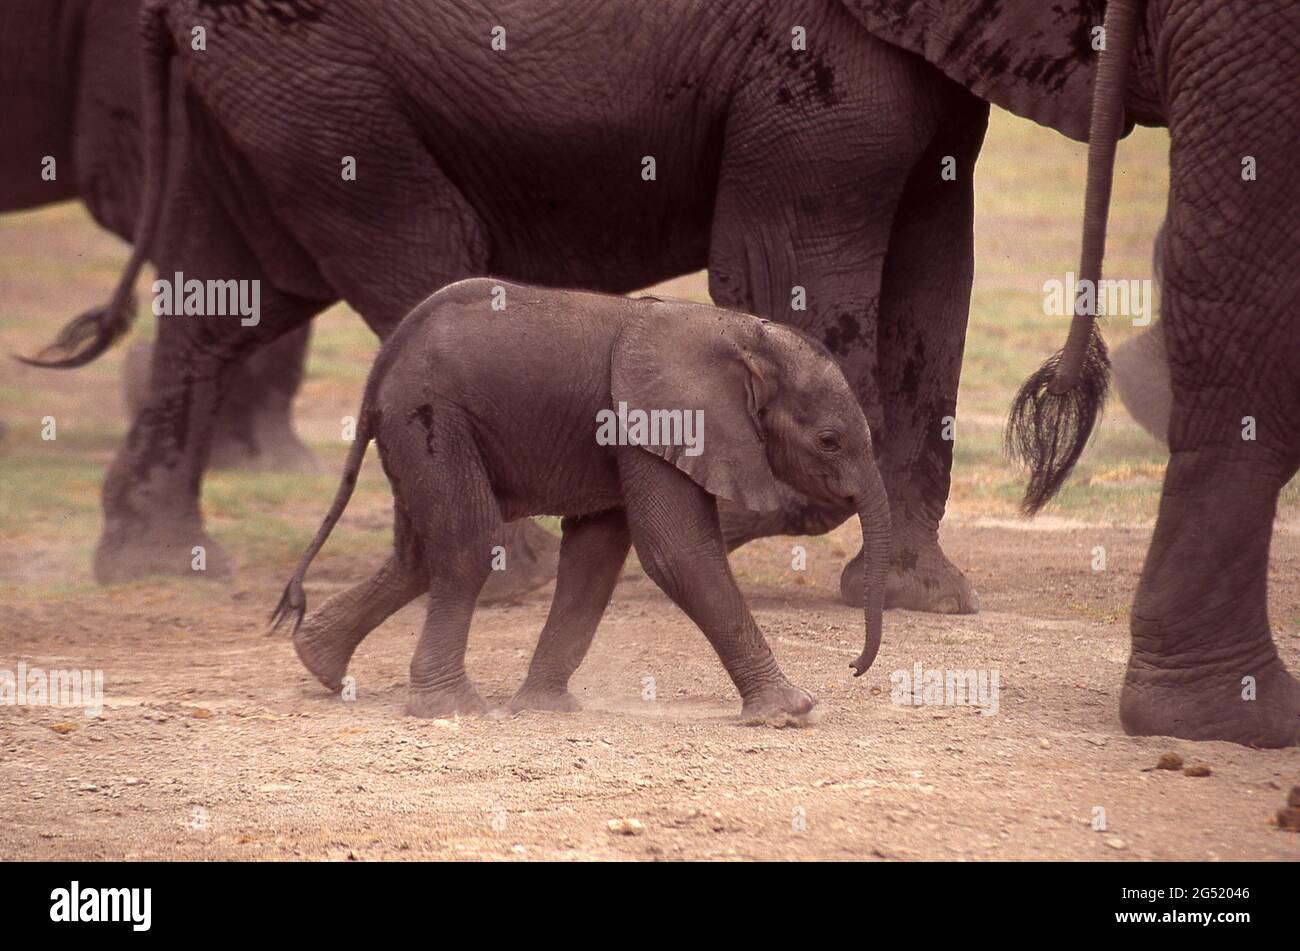 Amboseli National Park, Kenya, Africa. A very young baby African elephant dwarfed by its neighbors stays close to its mother within a large herd. Stock Photo